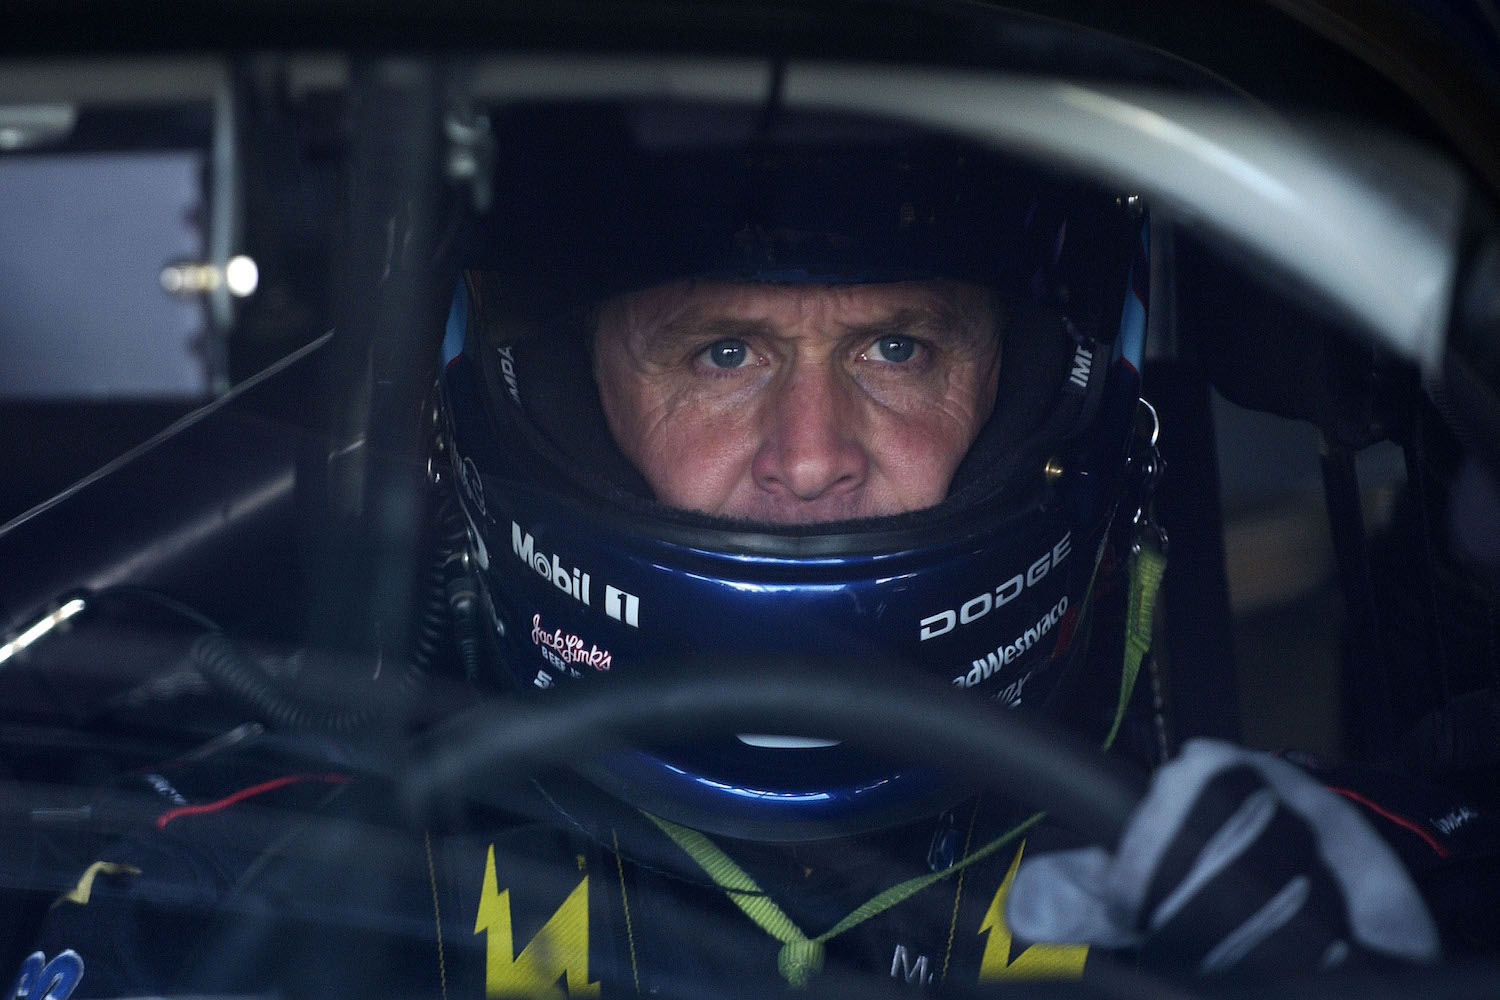 NASCAR driver Rusty Wallace behind the wheel of his race car with his helmet on.